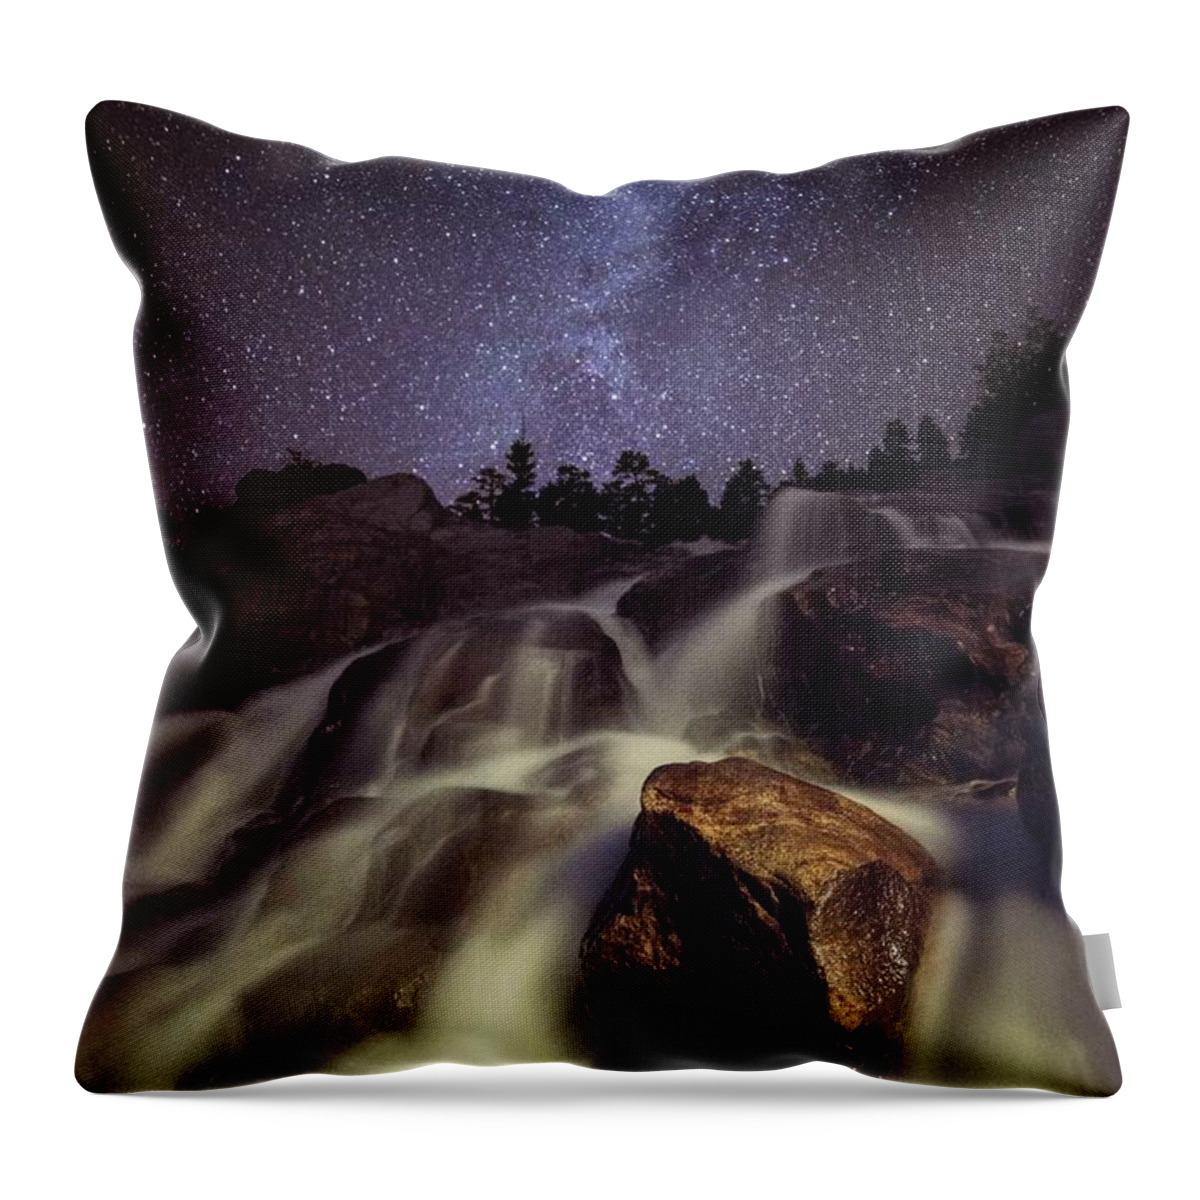 Tranquility Throw Pillow featuring the photograph Capturing A Starry Night Waterfall In by Mike Berenson / Colorado Captures